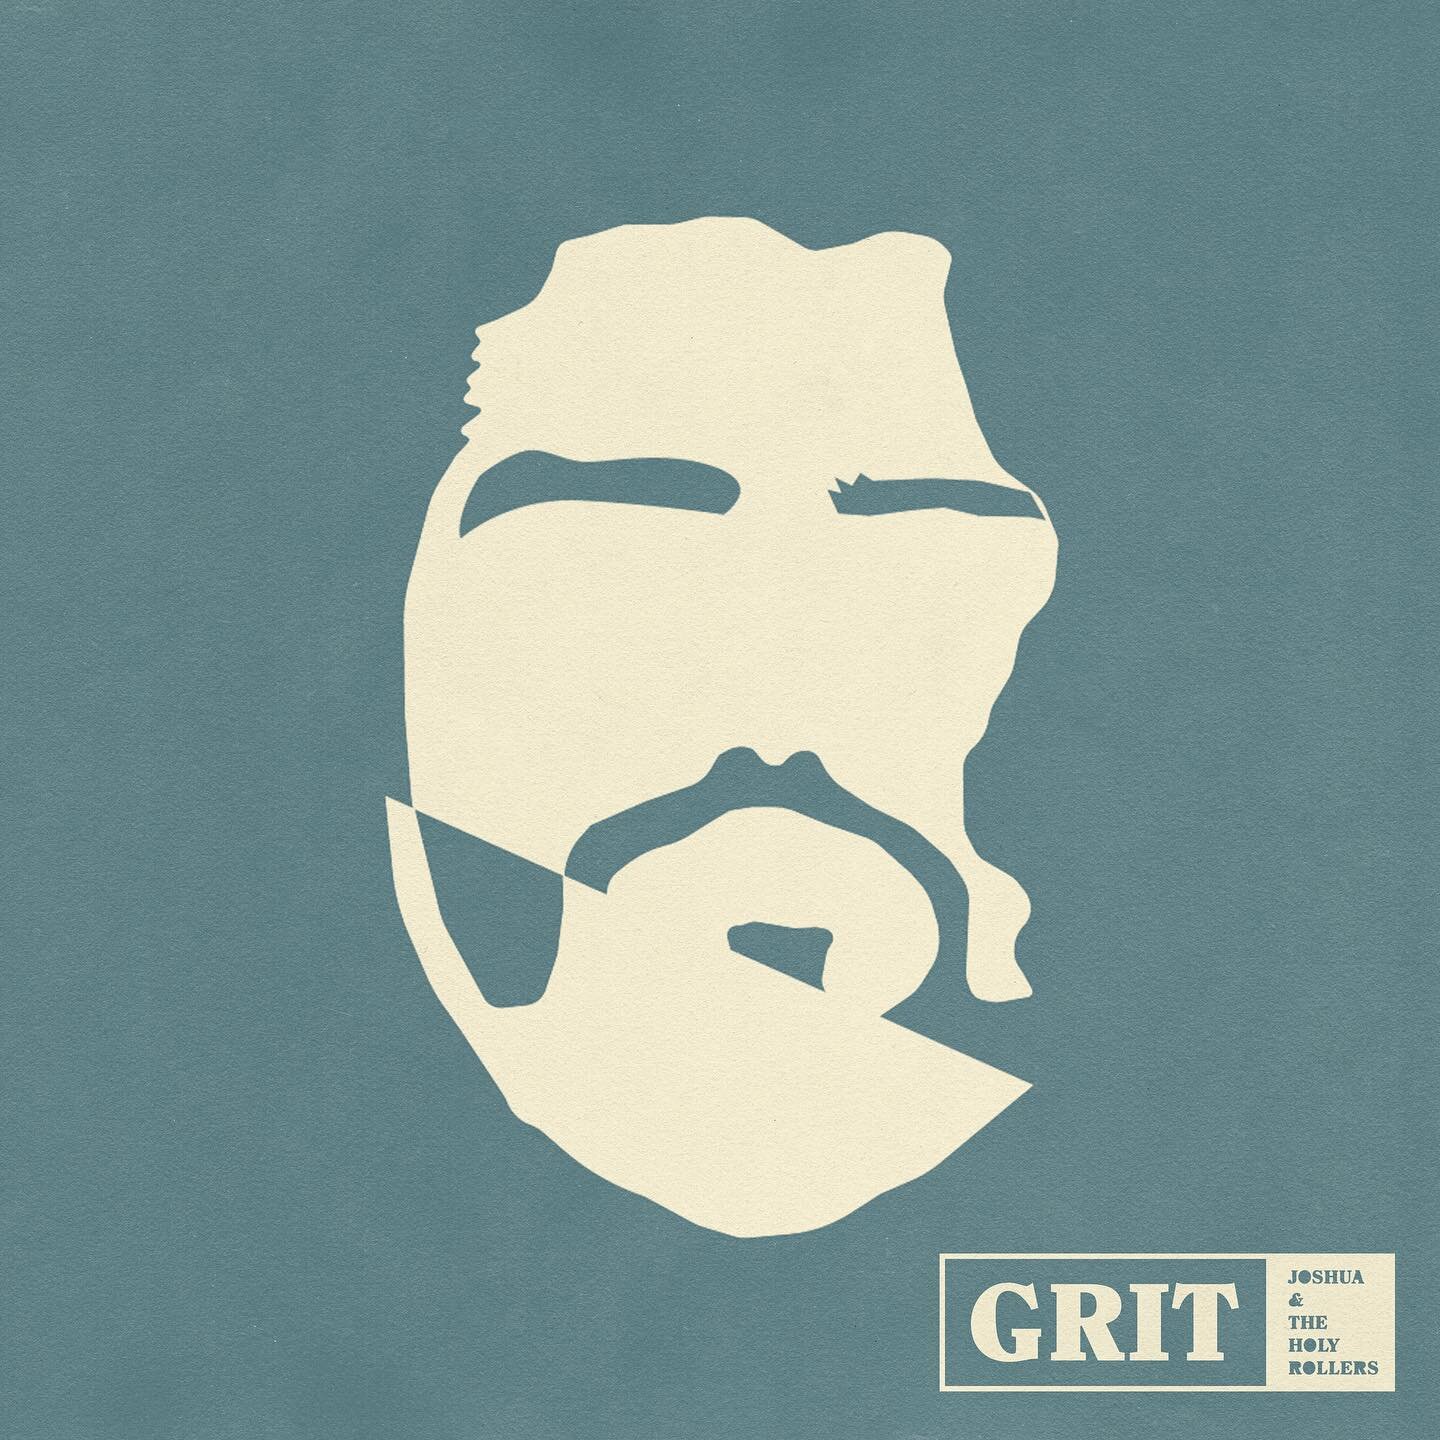 EP 3 
&ldquo;GRIT&rdquo;
Is out
In the world 
and it&rsquo;s in the bio 

In the spring of 2018, I was driving back to Los Angeles after recording what would become the first JTHR EP, wondering to myself what I would call the beginning of my most sin